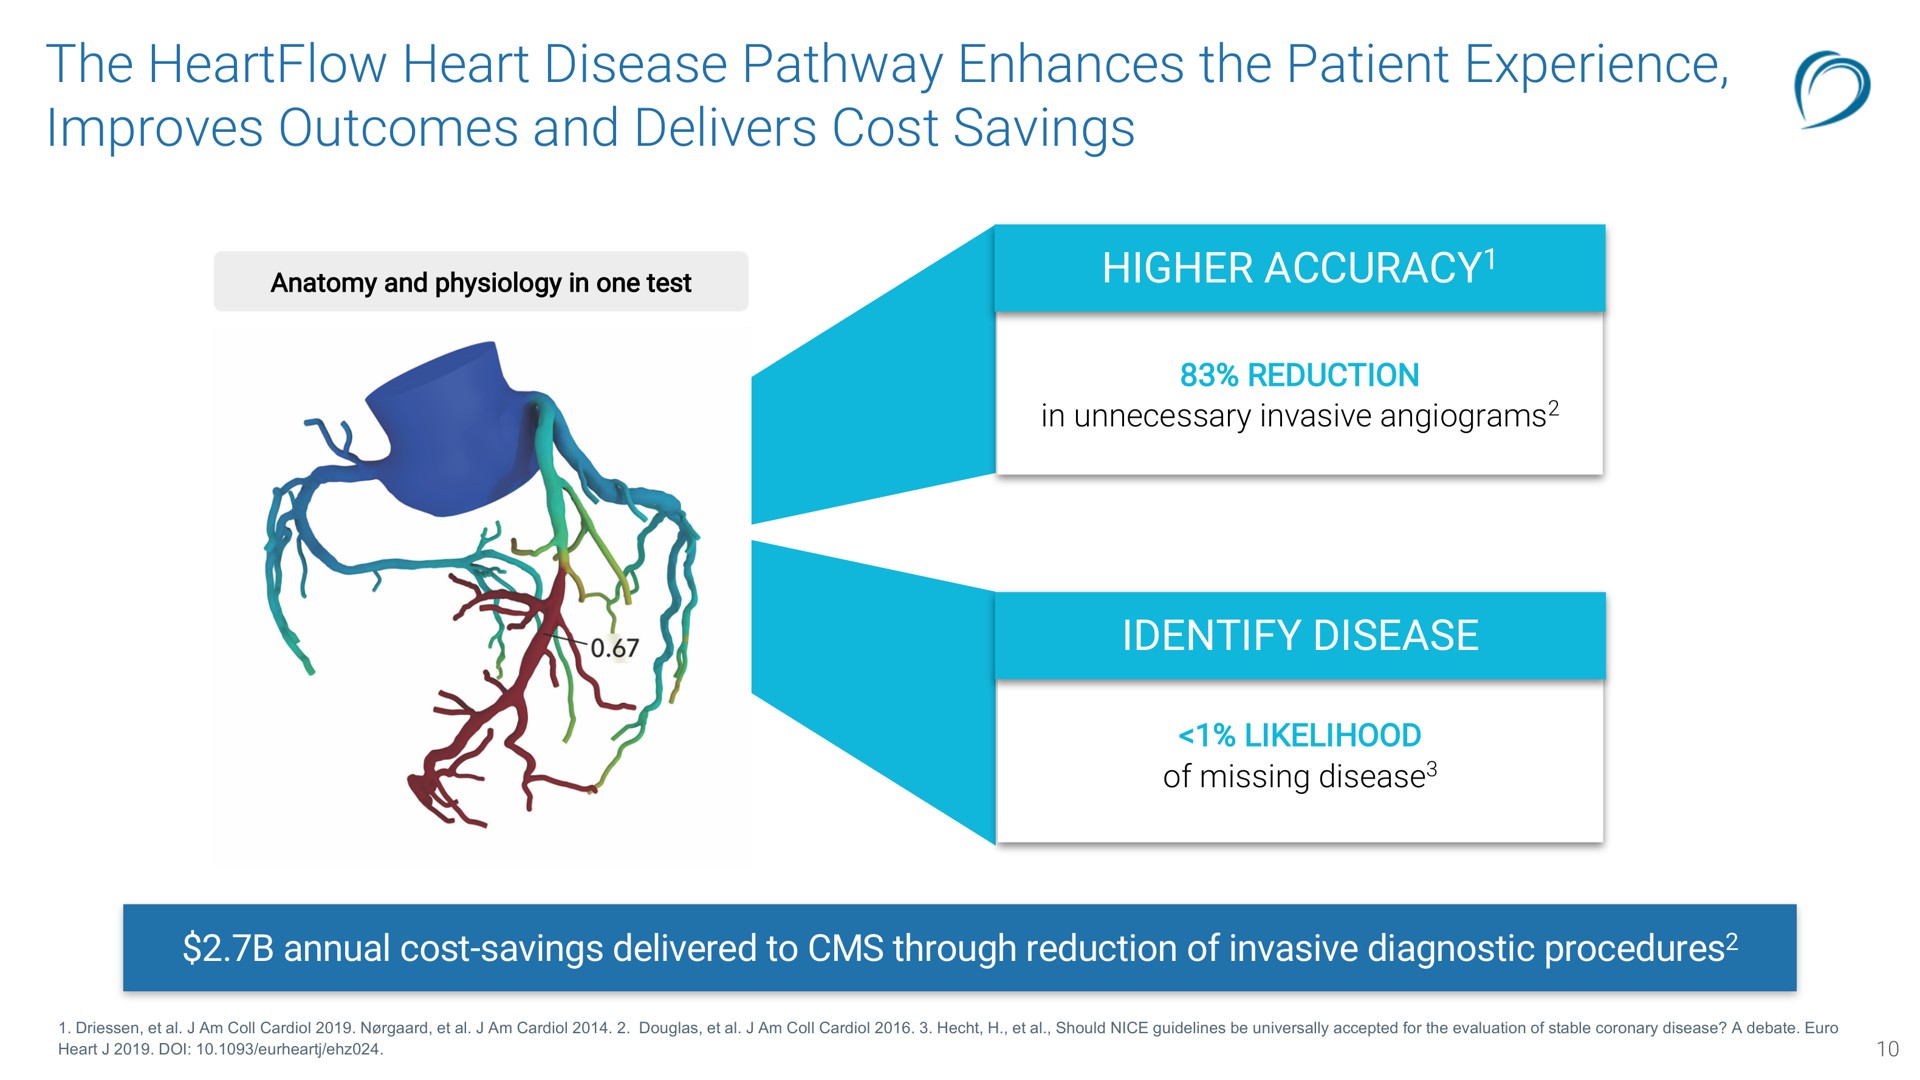 the heart disease pathway enhances the patient experience improves outcomes and delivers cost savings higher accuracy identify disease | HearFlow